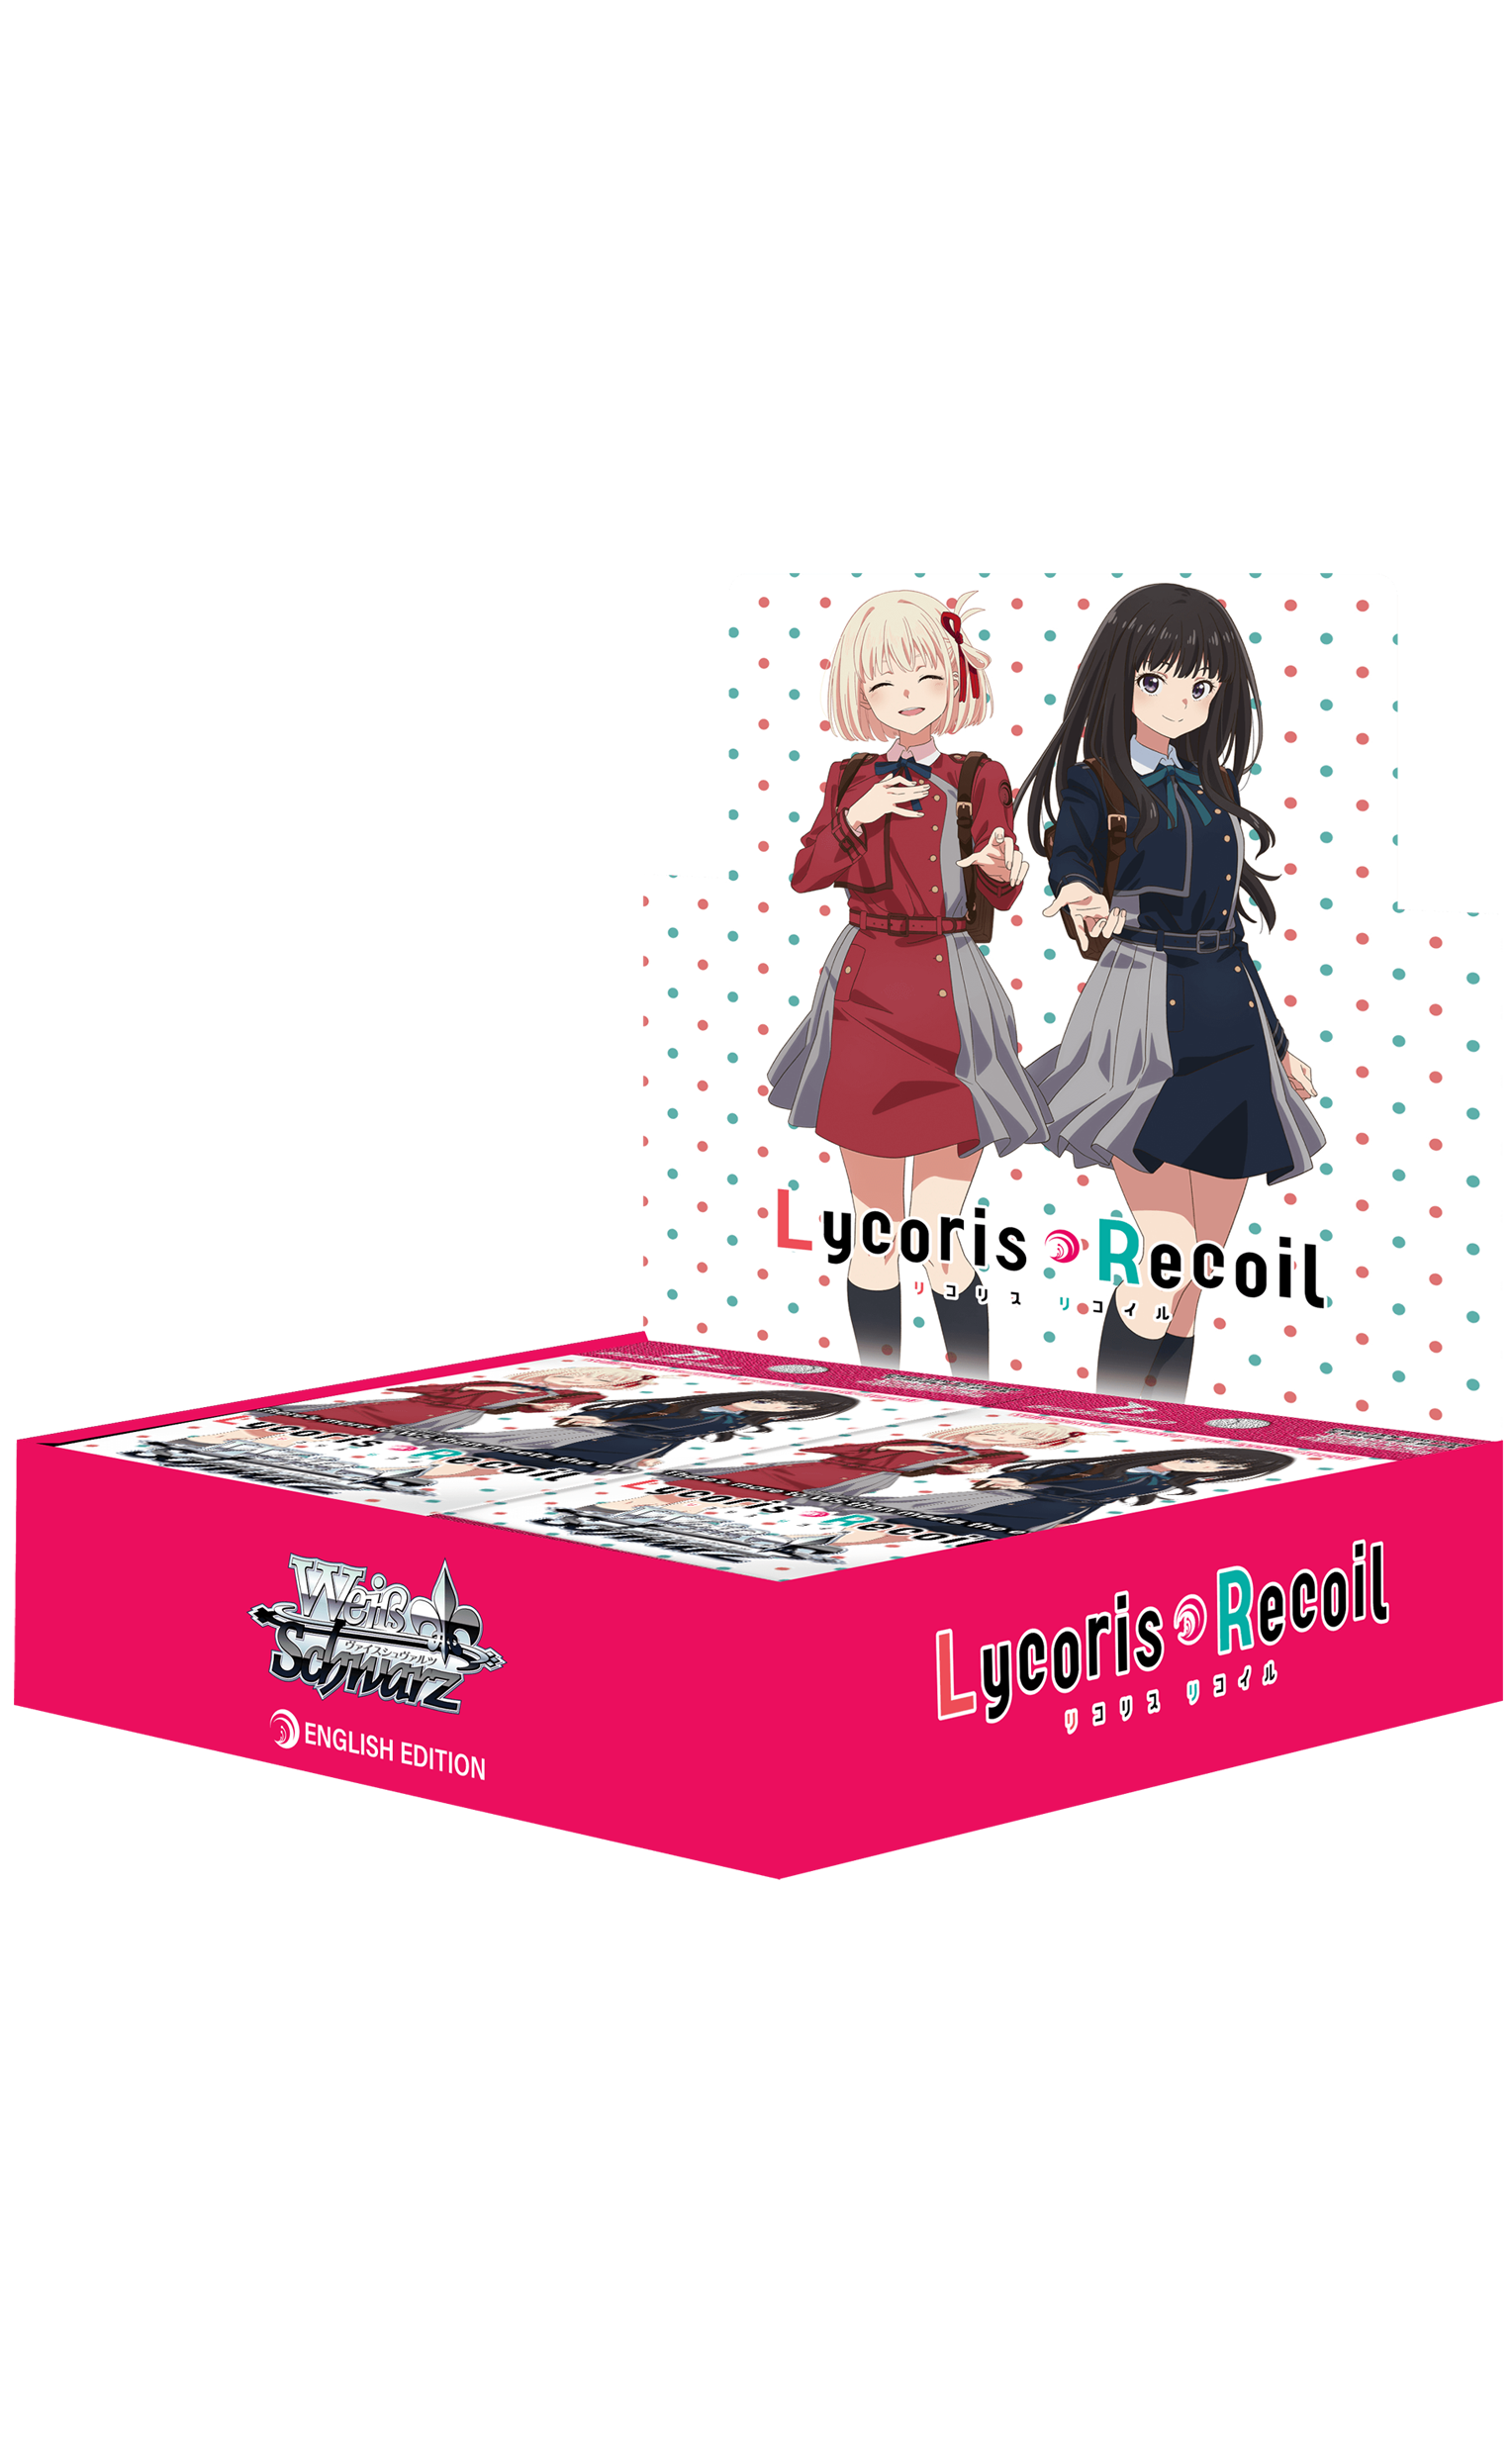 Booster Pack Lycoris Recoil display